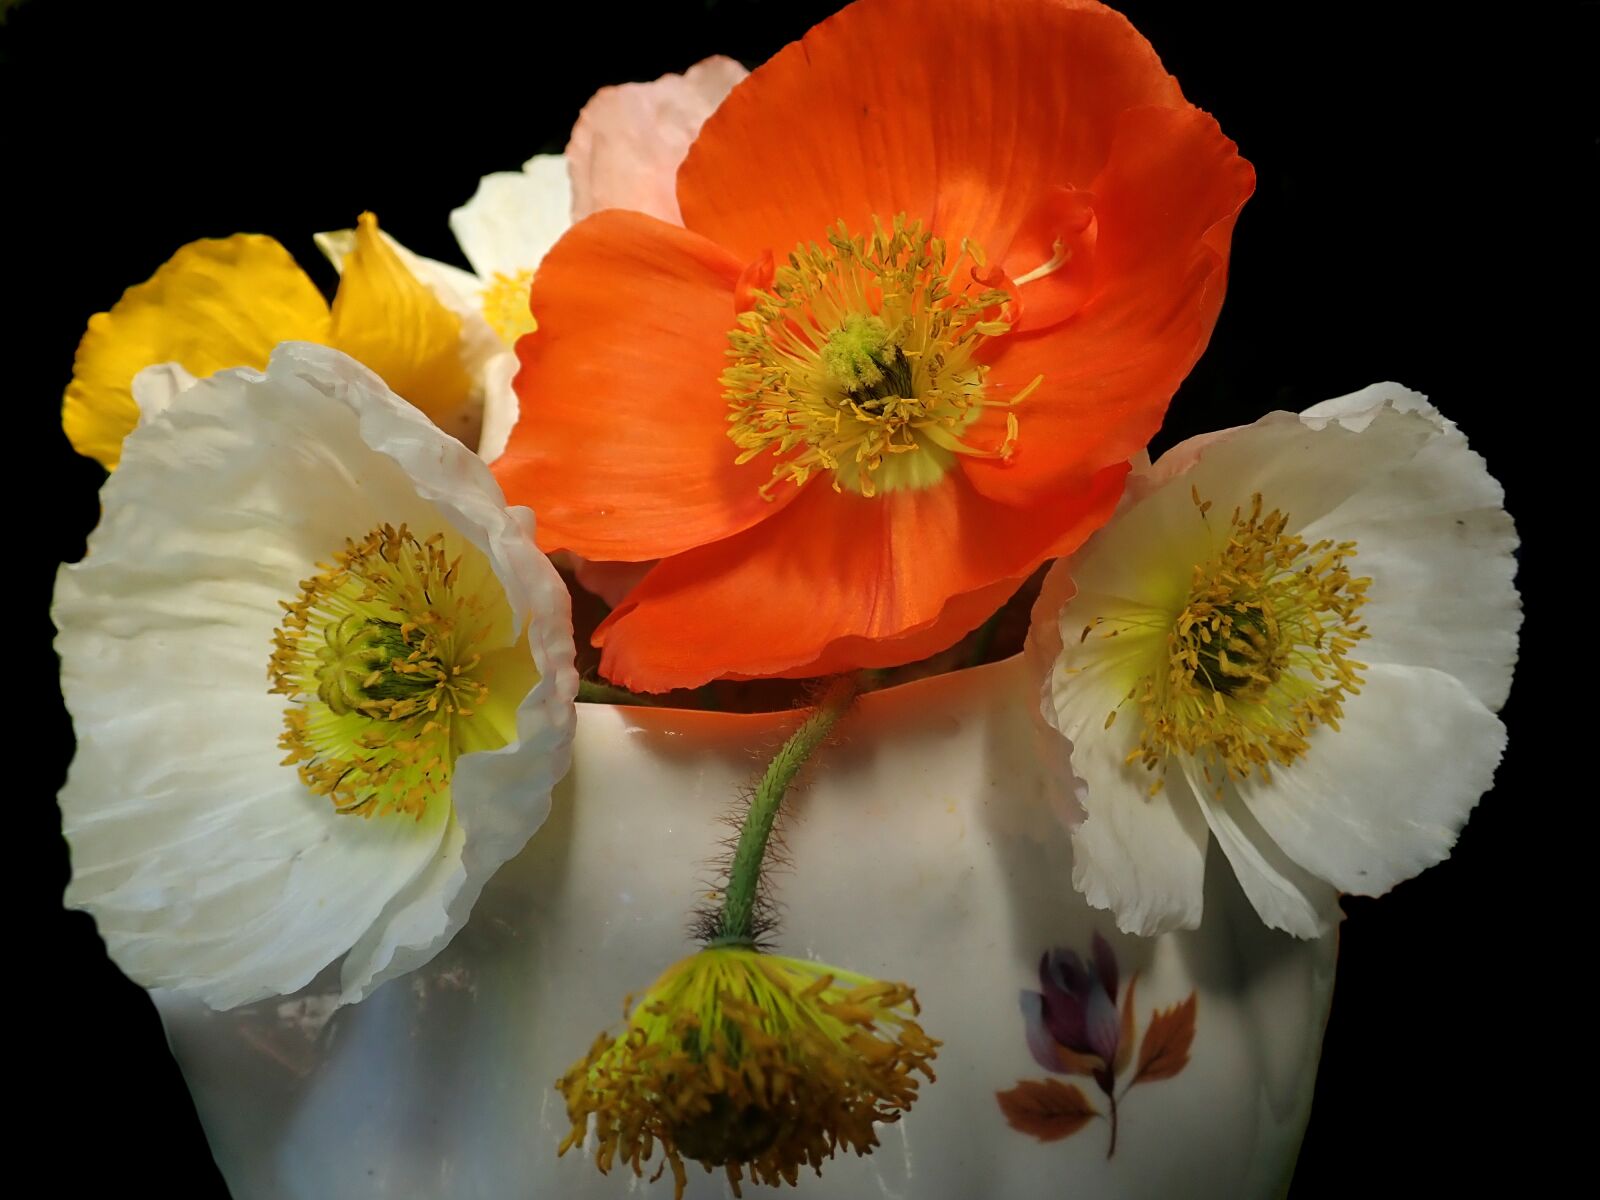 Olympus TG-5 sample photo. Flowers, poppies, summer photography